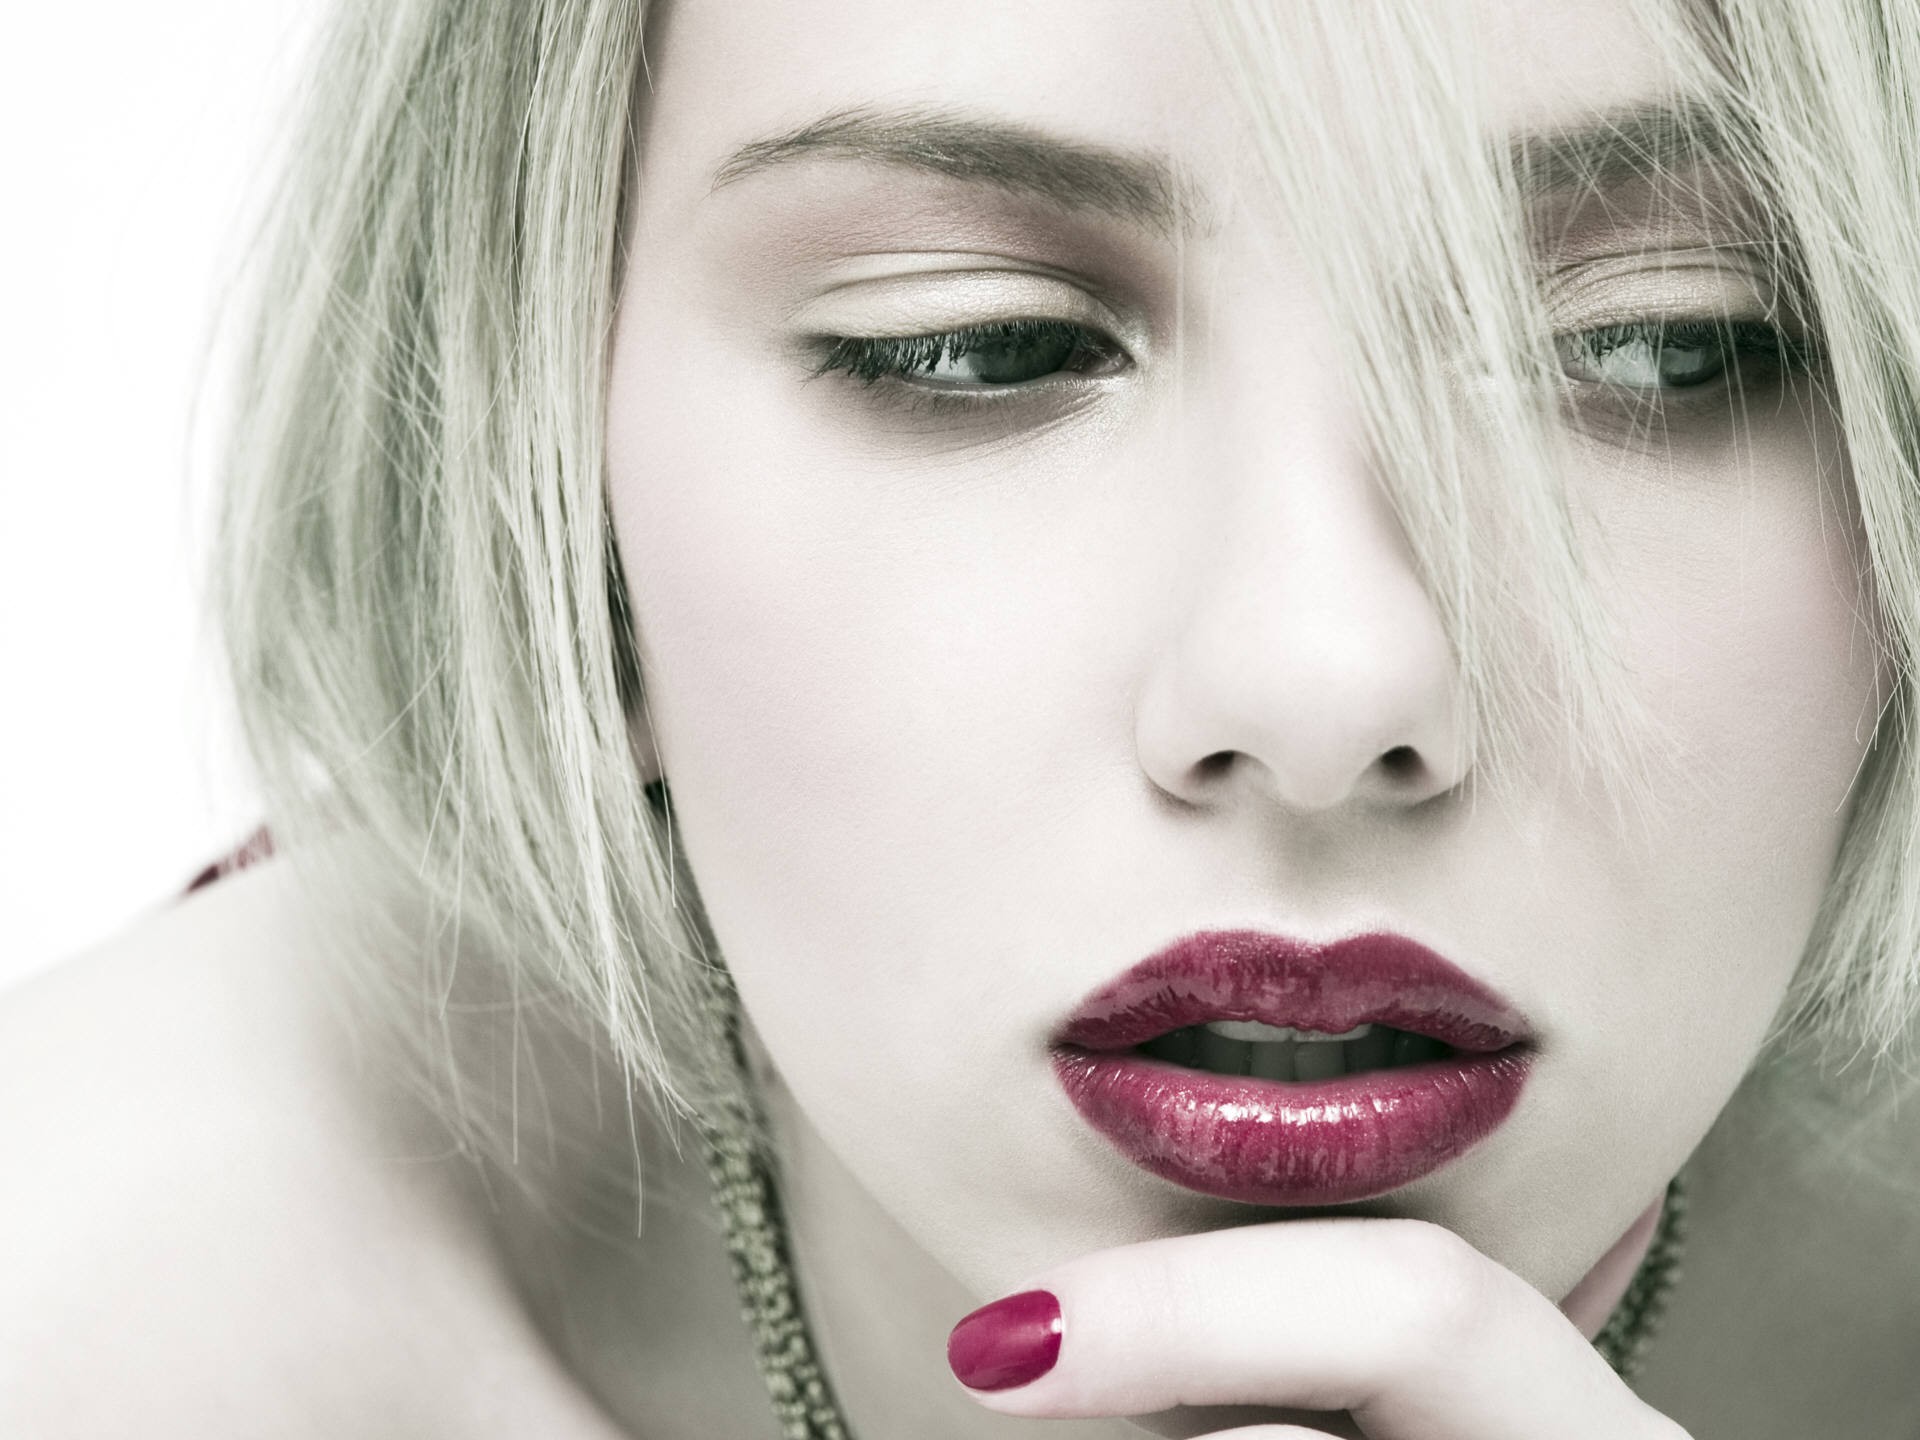 People 1920x1440 Scarlett Johansson women face painted nails lipstick makeup actress celebrity red lipstick looking away